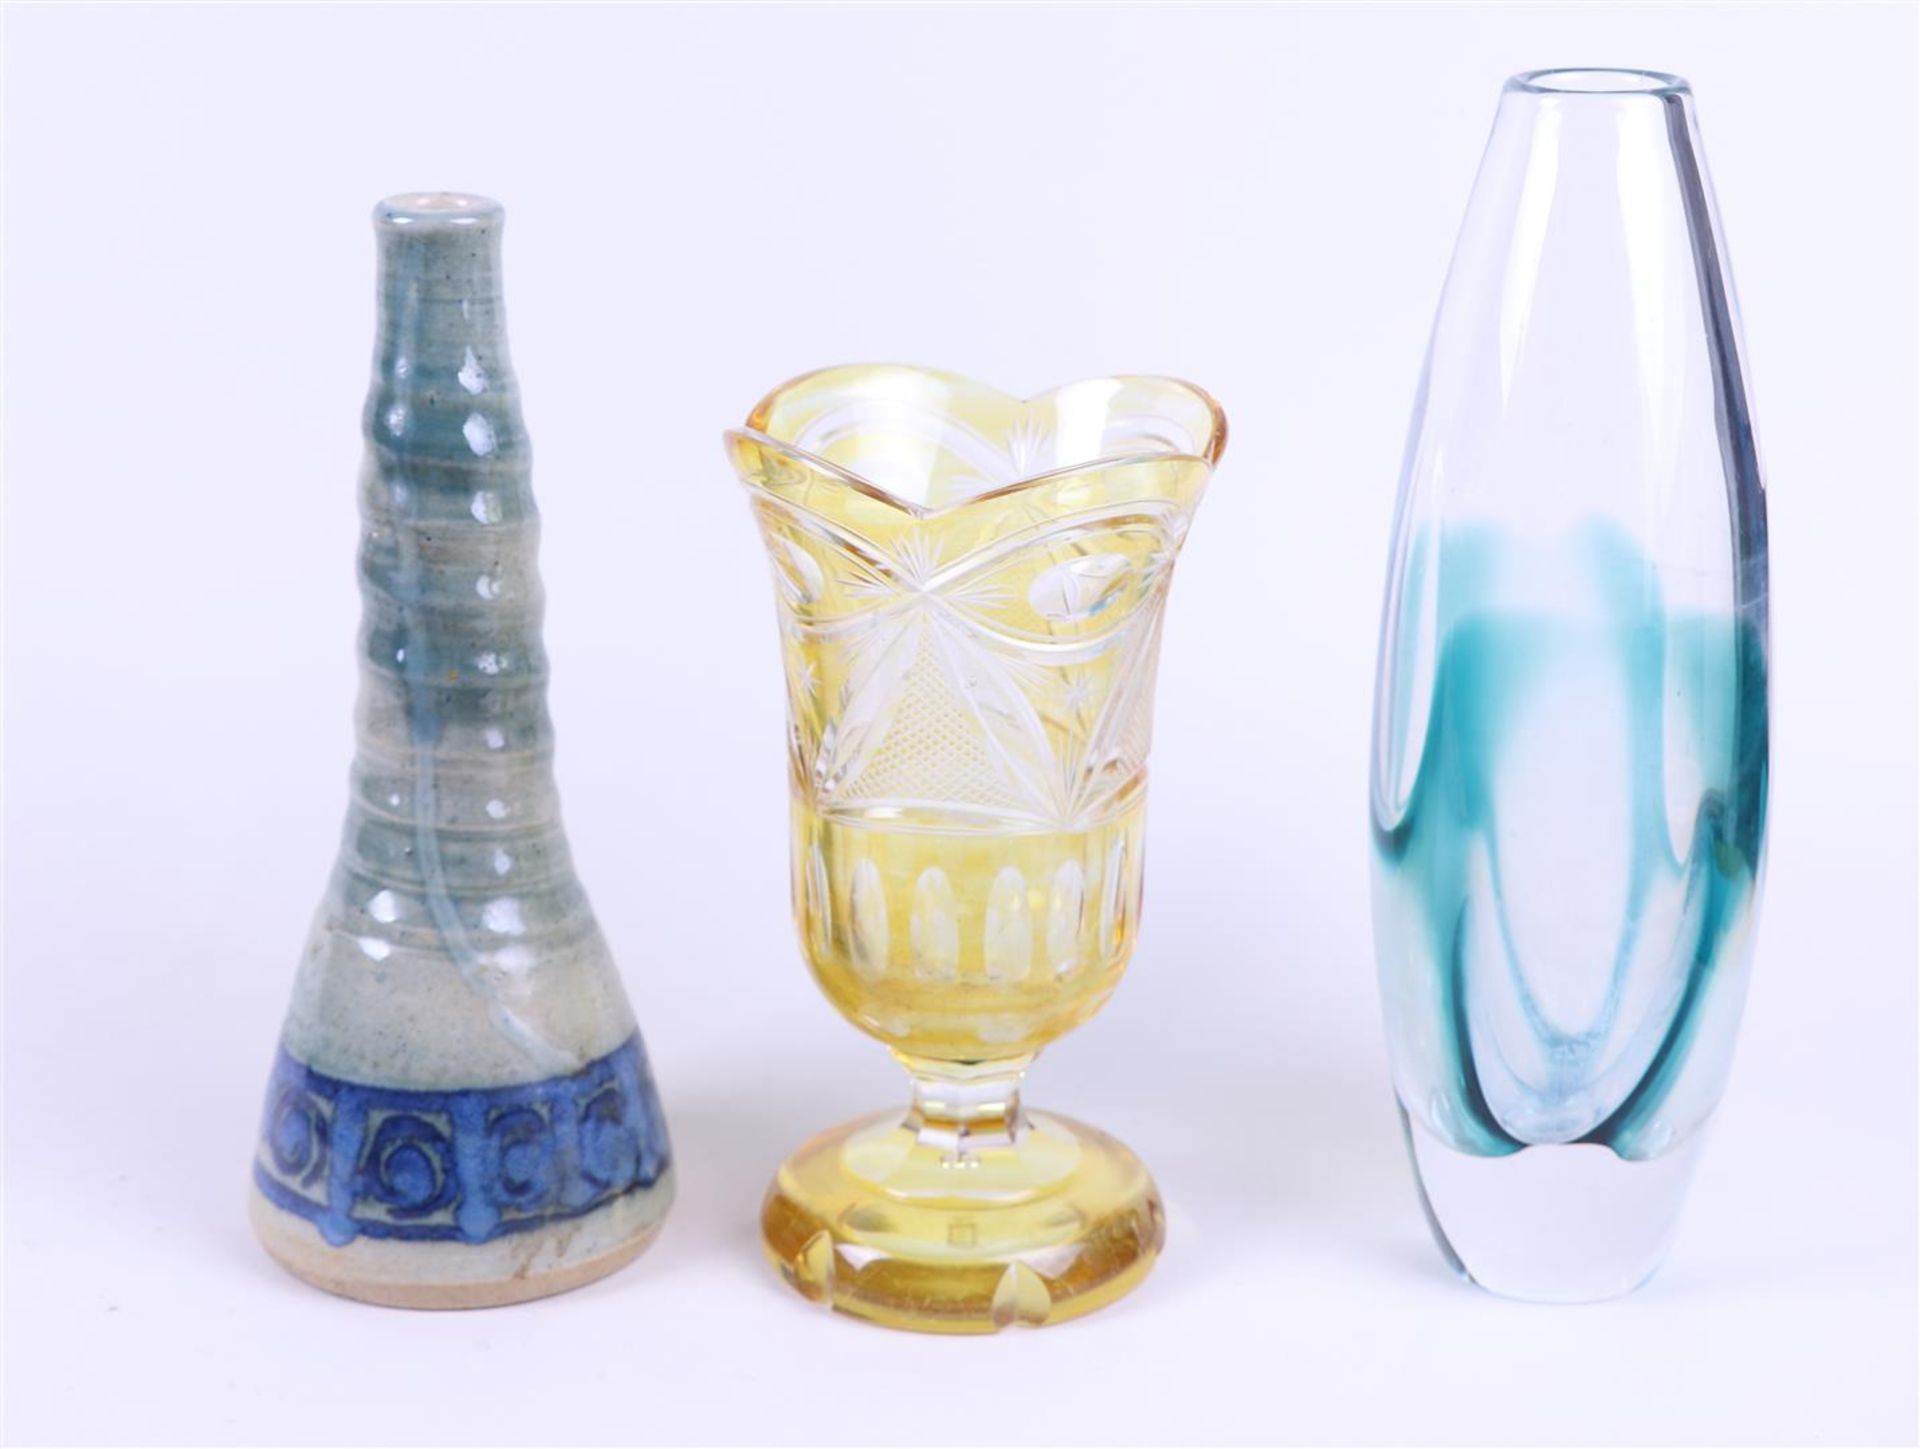 Lot of a Yellow "Bohemian" Goblet Vase, an Earthenware Vase, and a Glass Vase